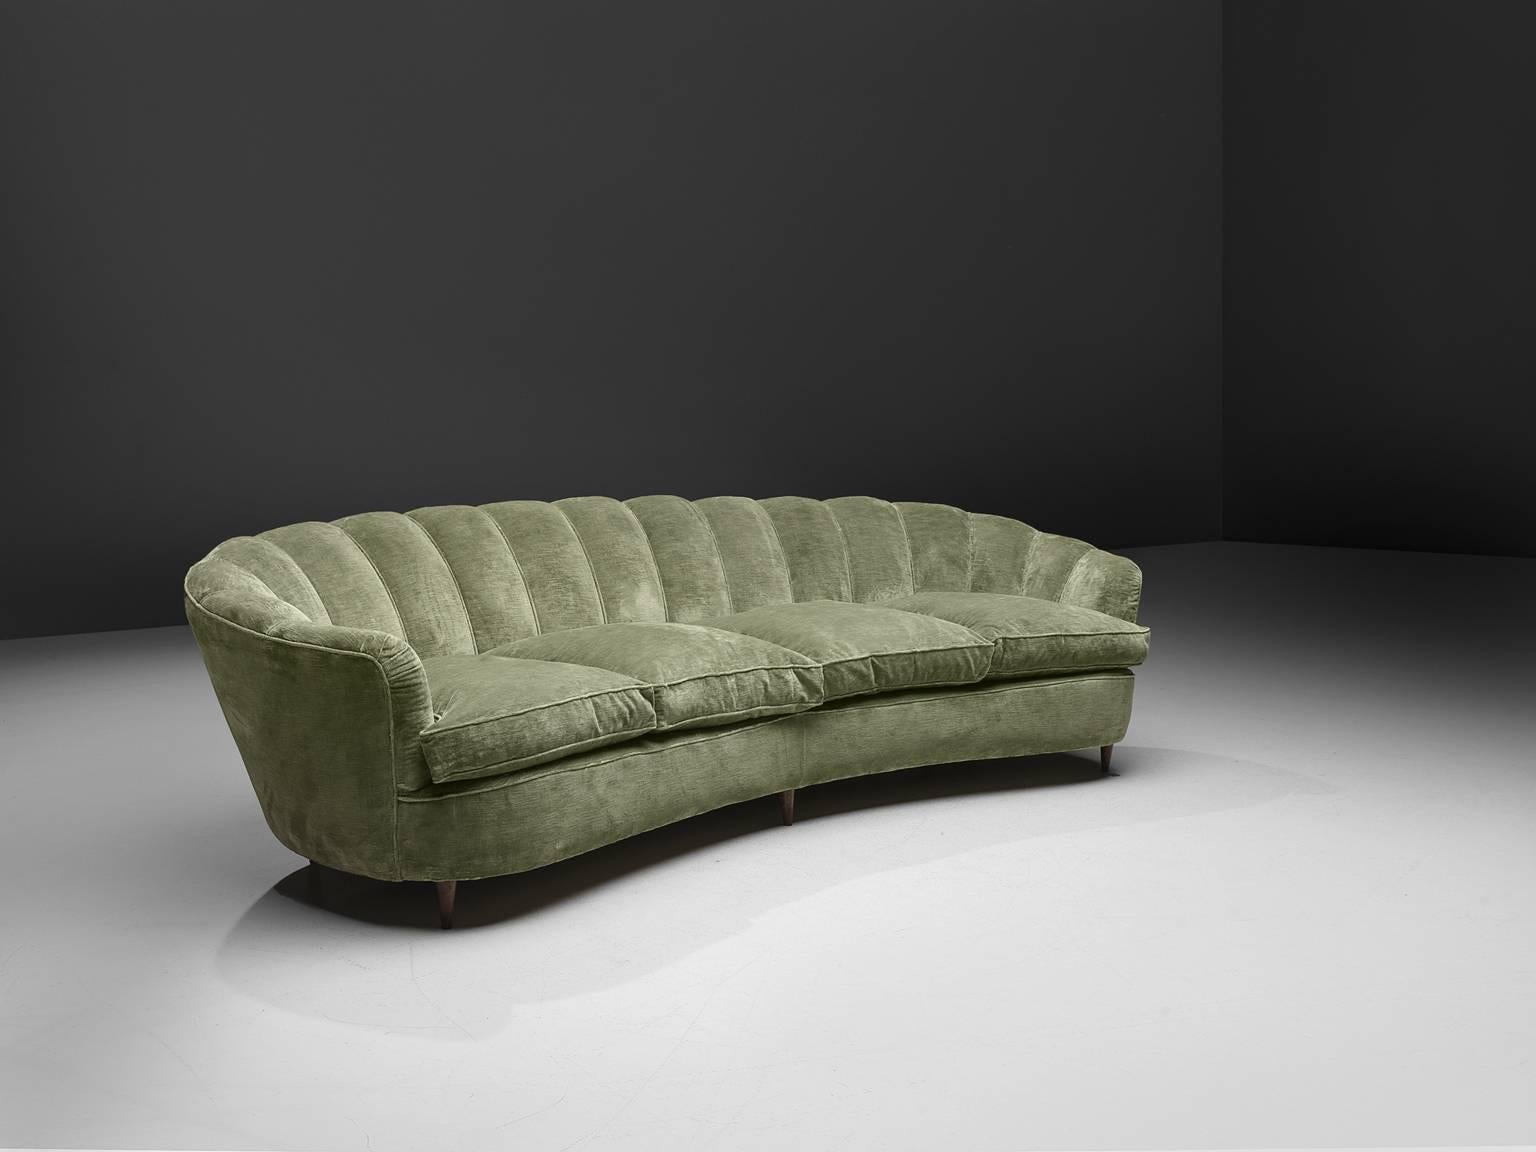 Sofa, green velvet, wood, Italy, 1950s.

This voluptuous sofa is executed with small wooden legs and shimmering green velvet fabric. The sofa has a webbed, curved back and a very thick body, both the back and armrests are bulky, strong and wide.